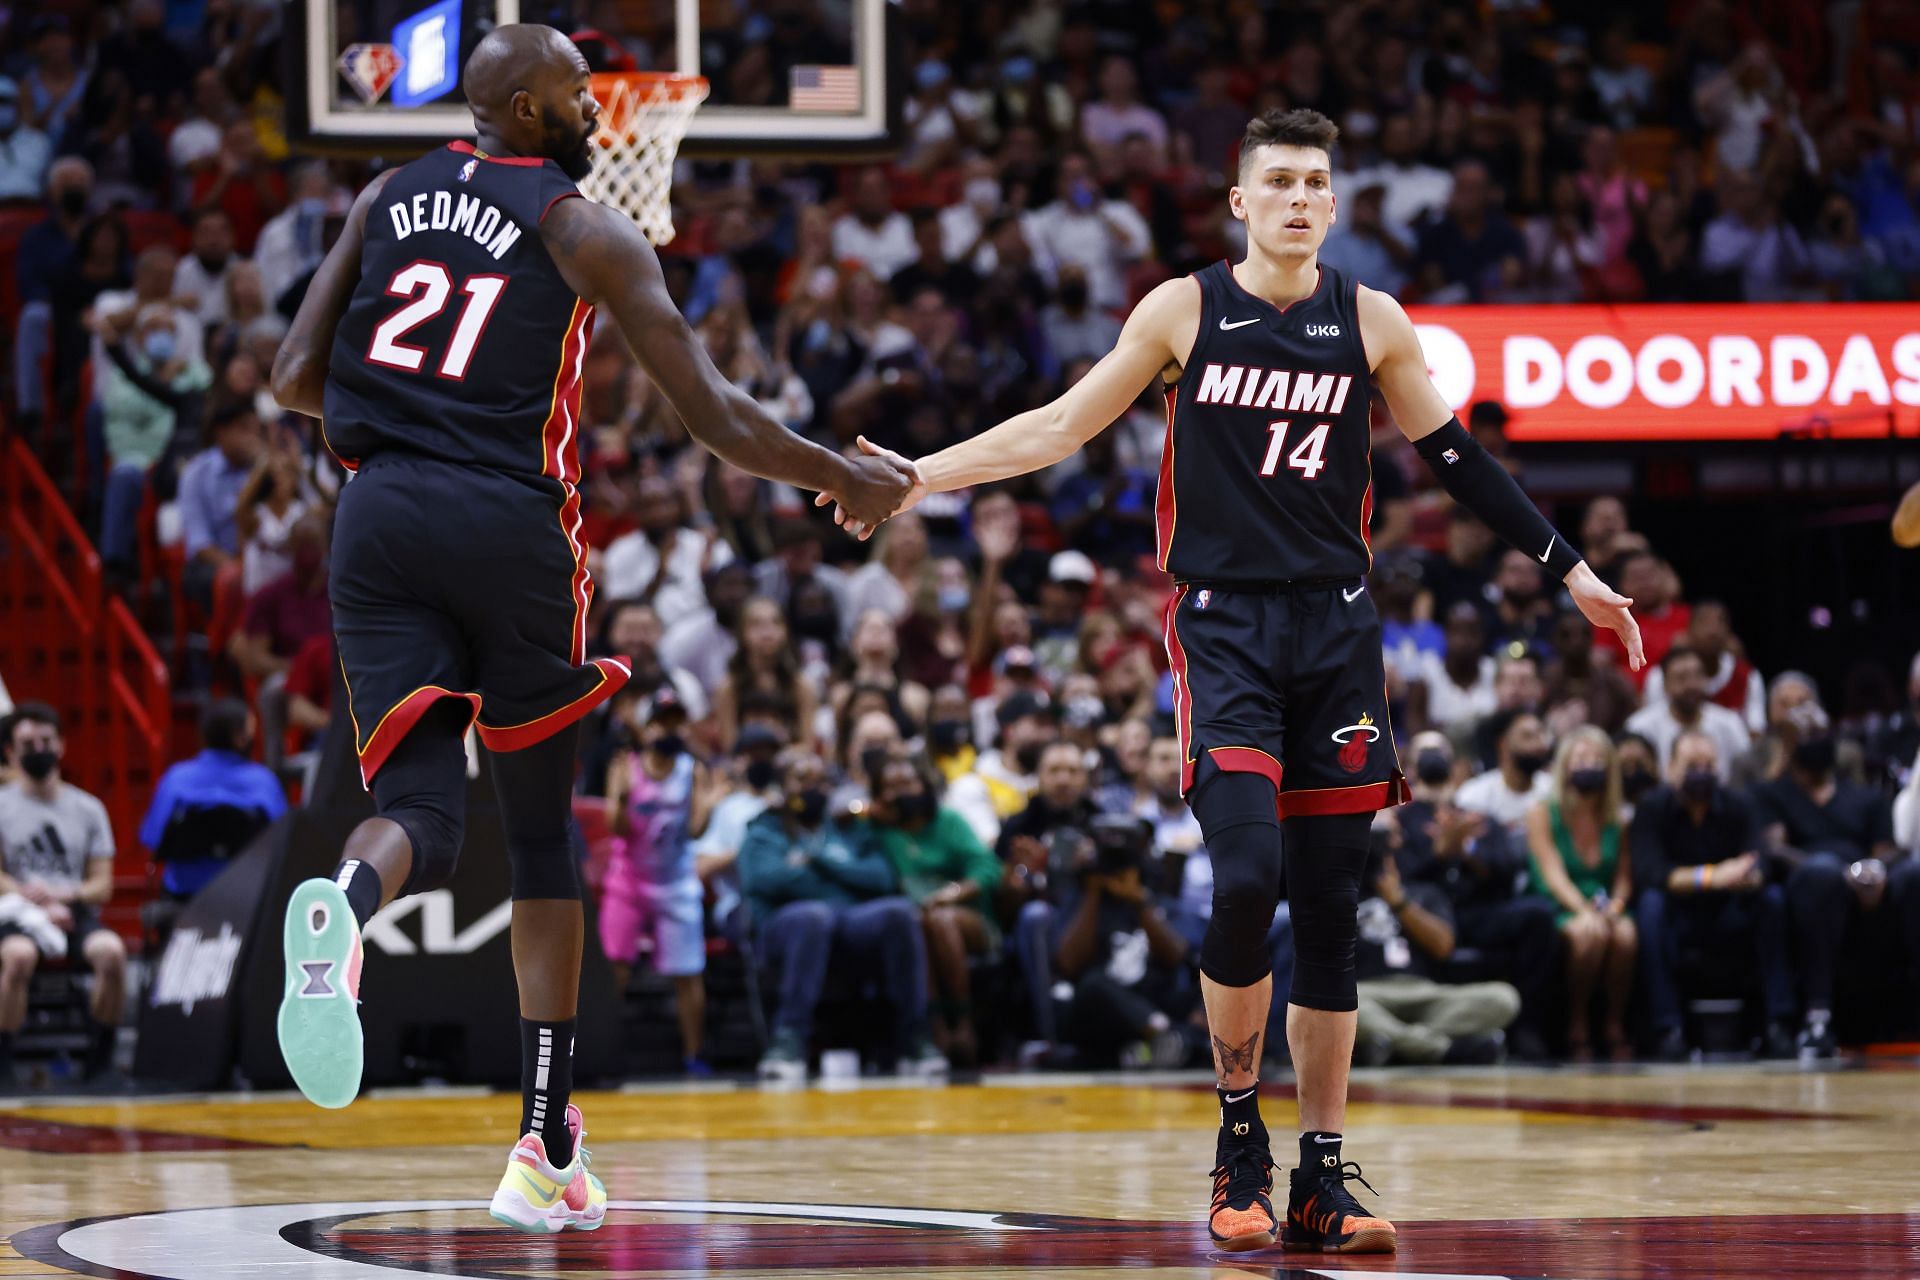 The Miami Heat have emerged as one of the strongest teams in the Eastern Conference